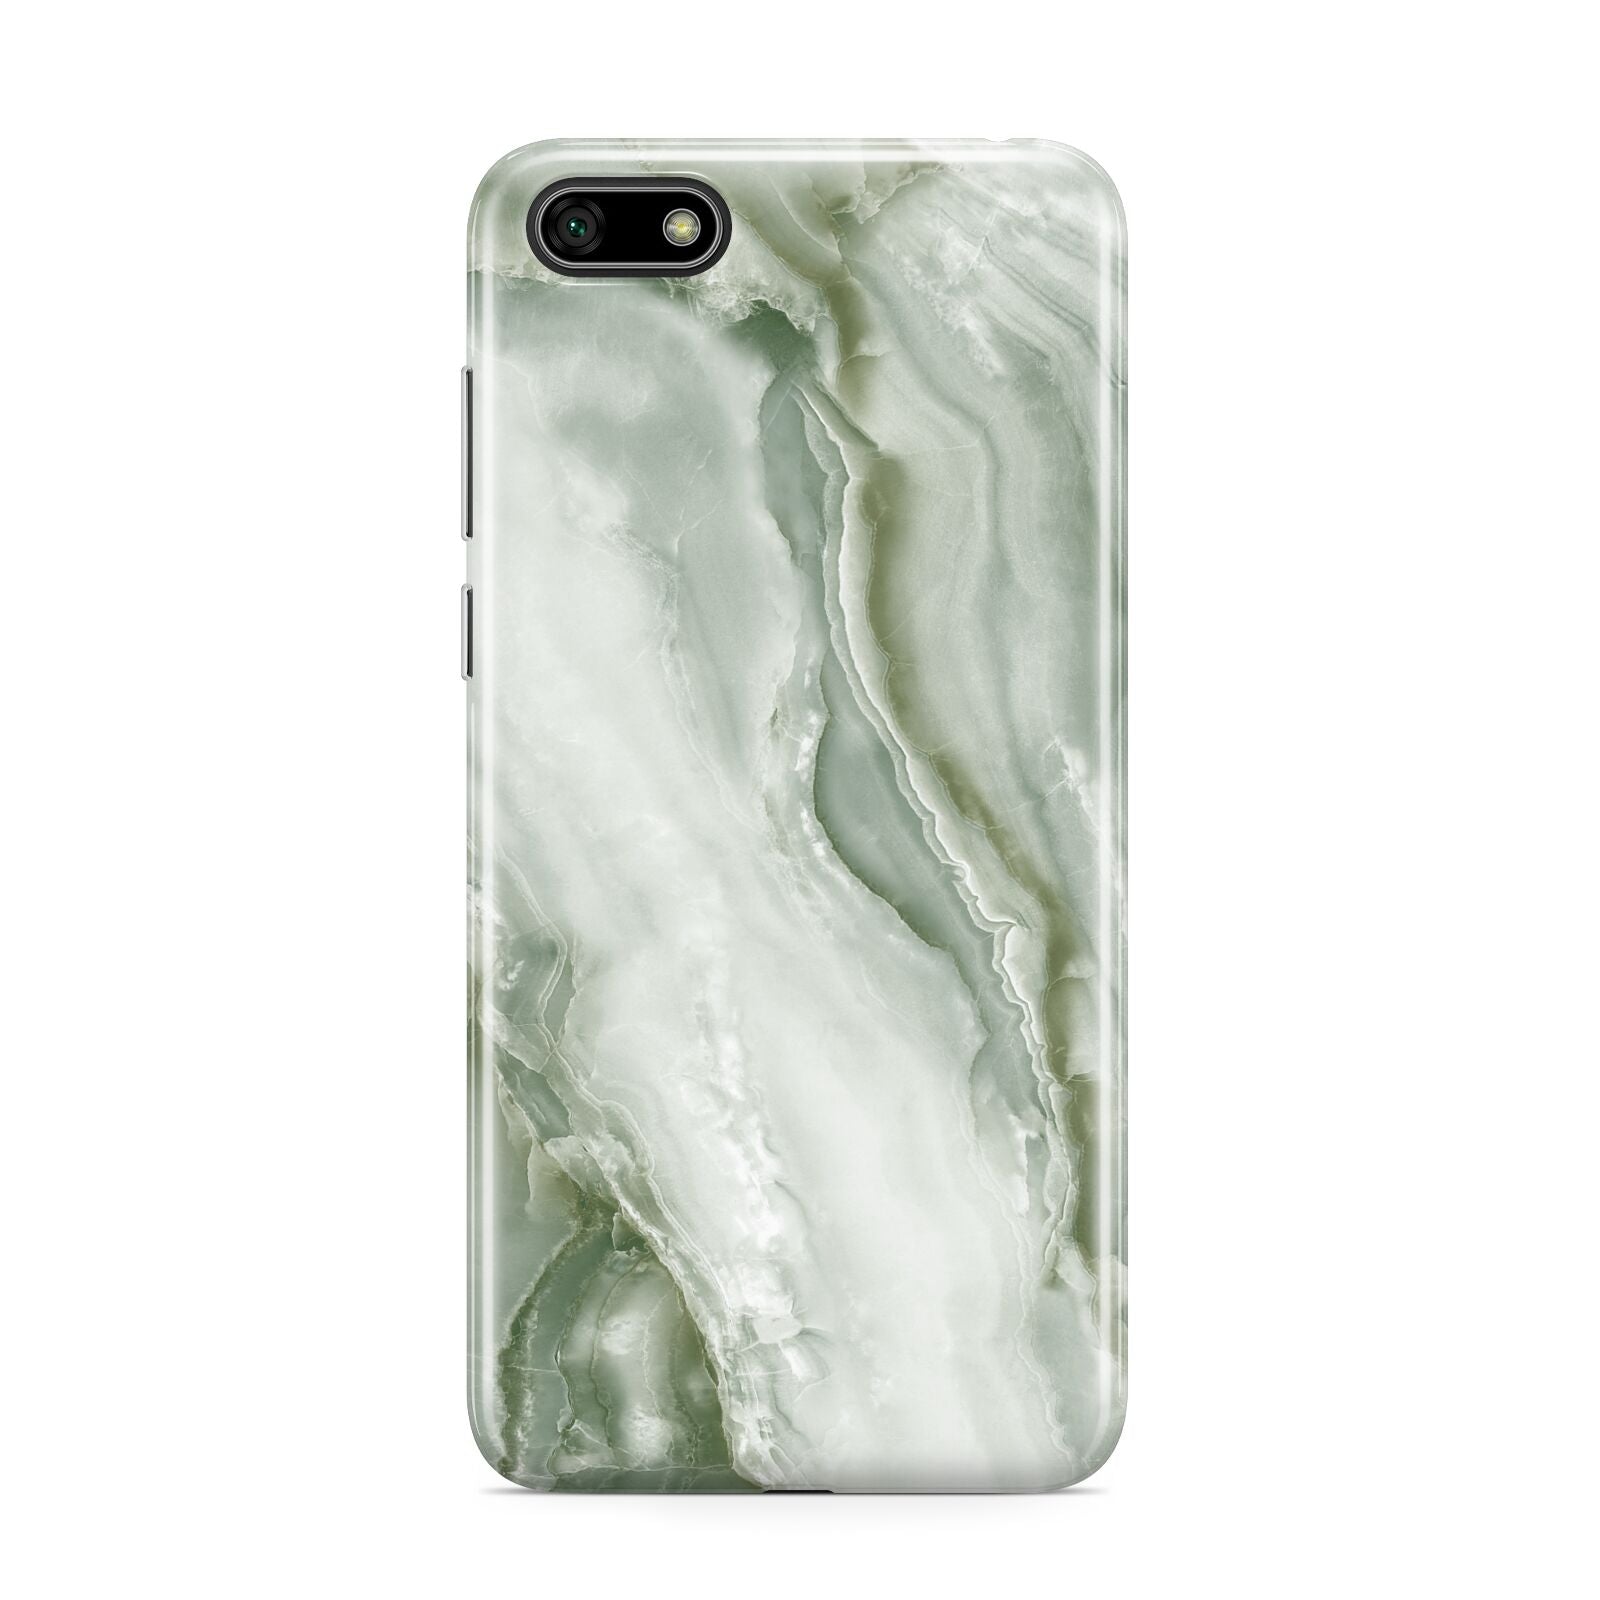 Pistachio Green Marble Huawei Y5 Prime 2018 Phone Case